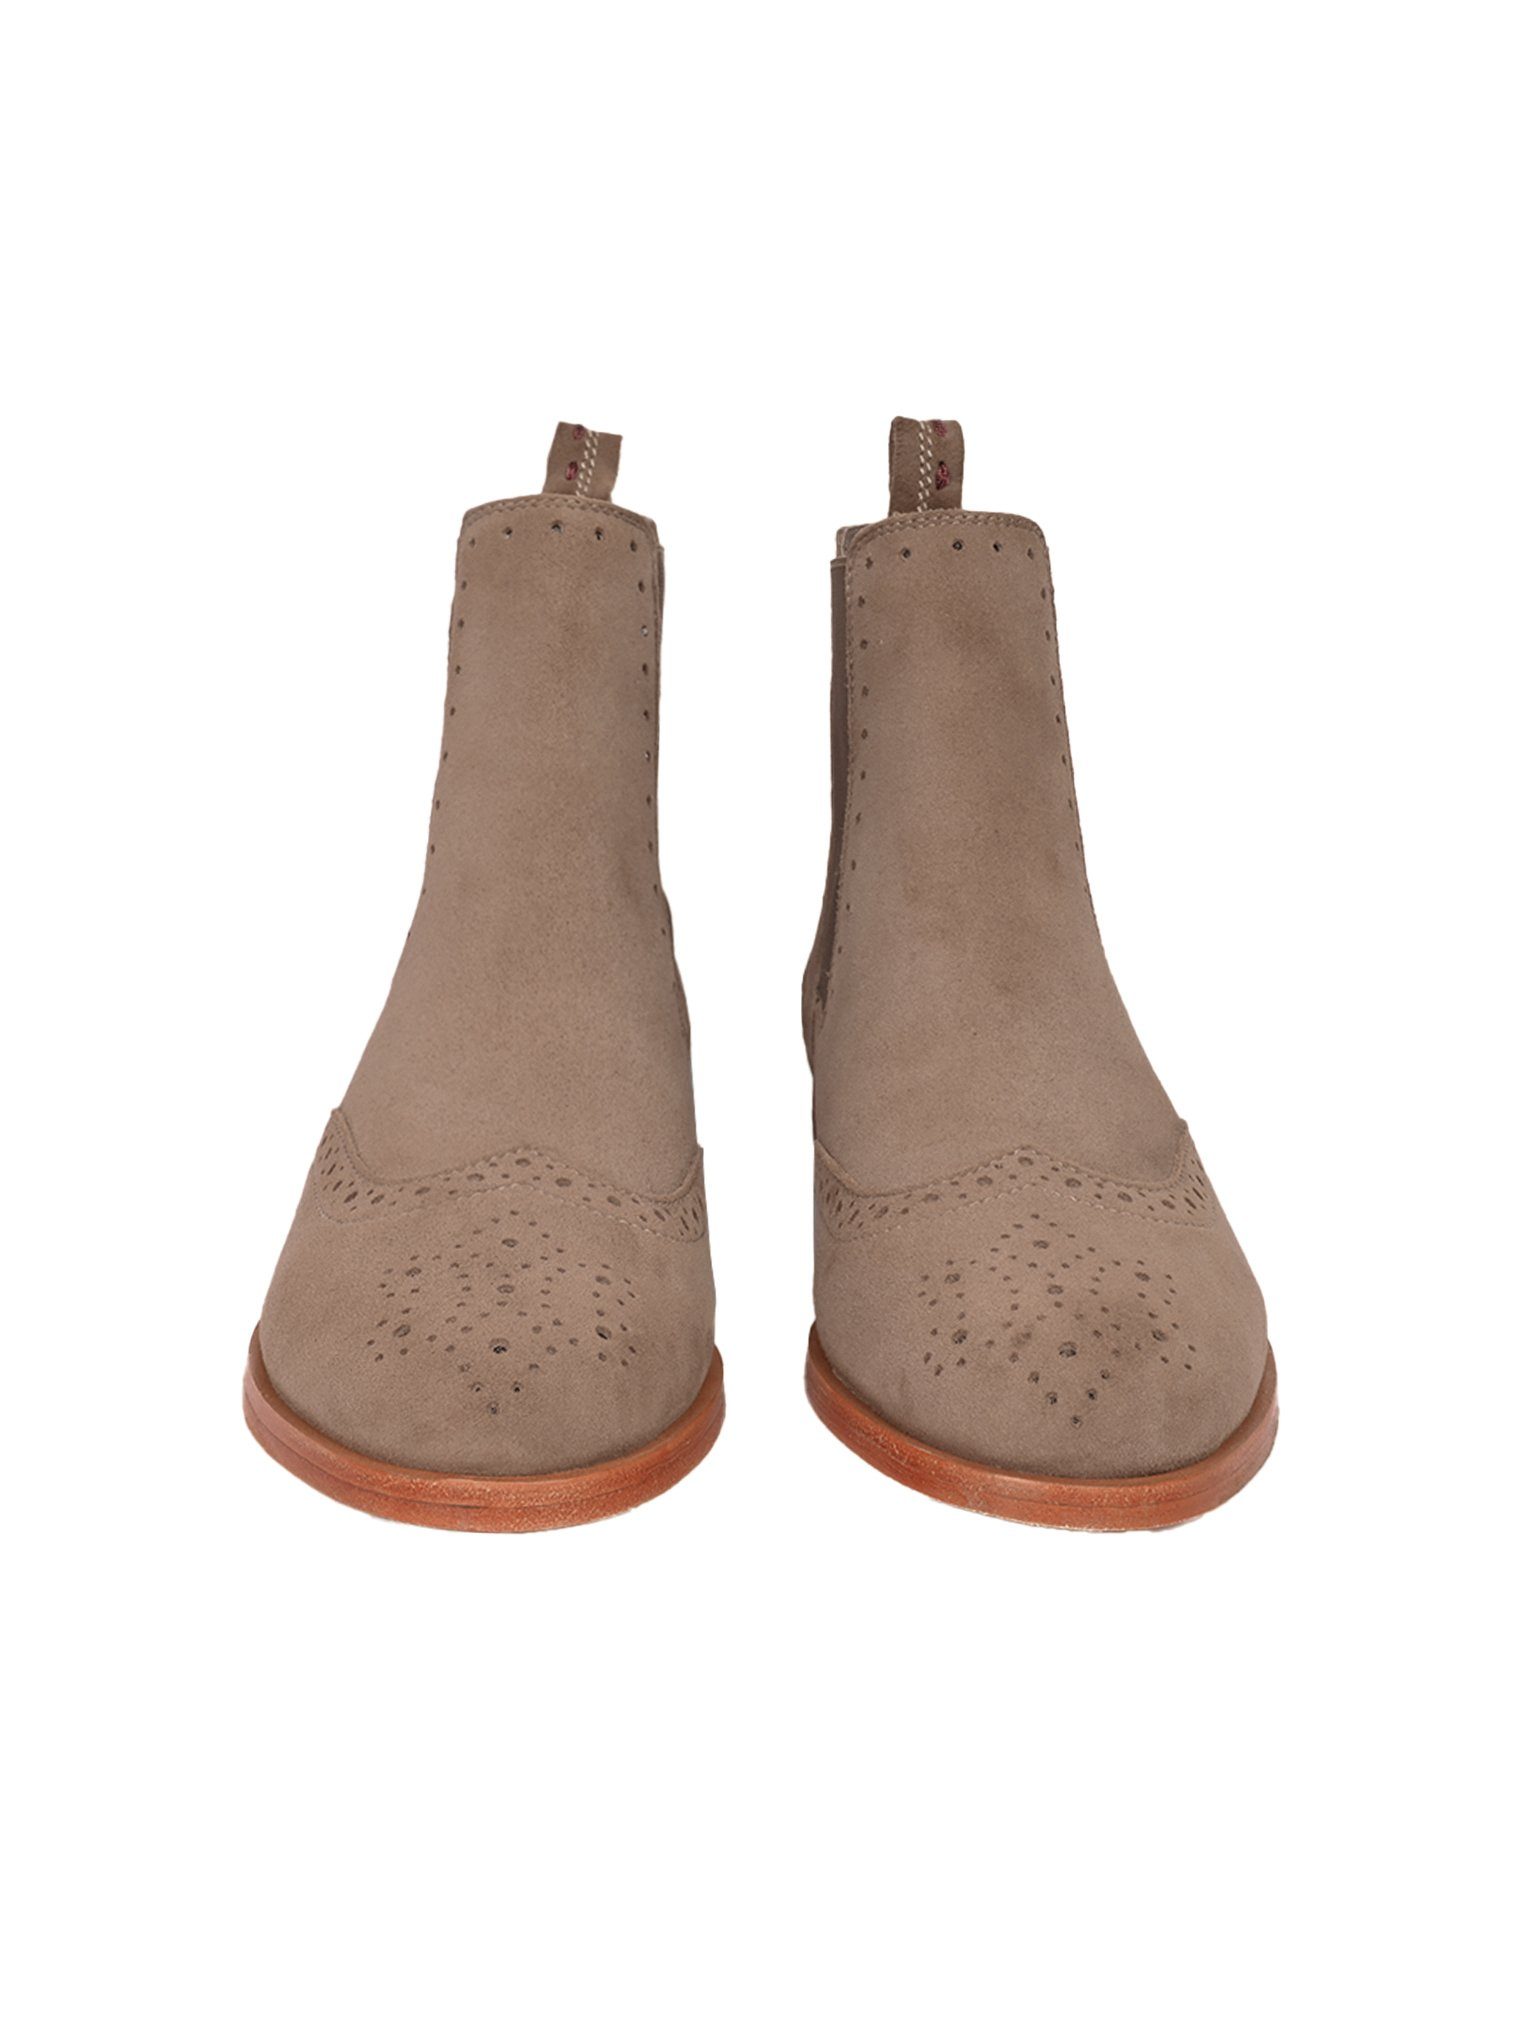 CRICKIT Taupe Chelseaboots HELEN